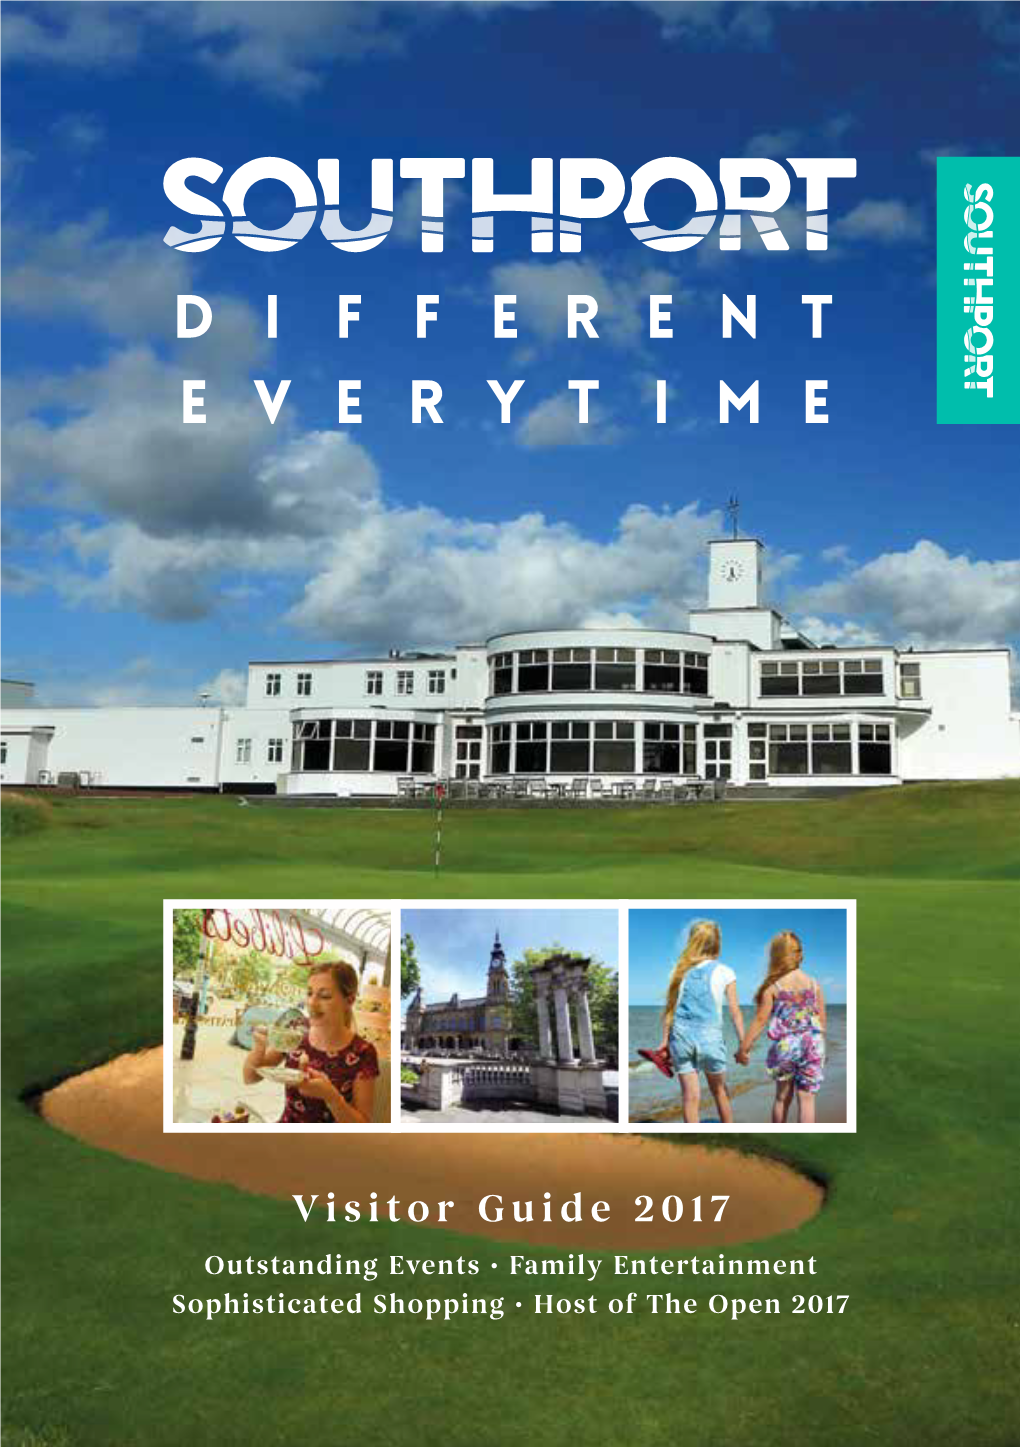 Visitor Guide 2017 Outstanding Events • Family Entertainment Sophisticated Shopping • Host of the Open 2017 Southport: Different Every Time